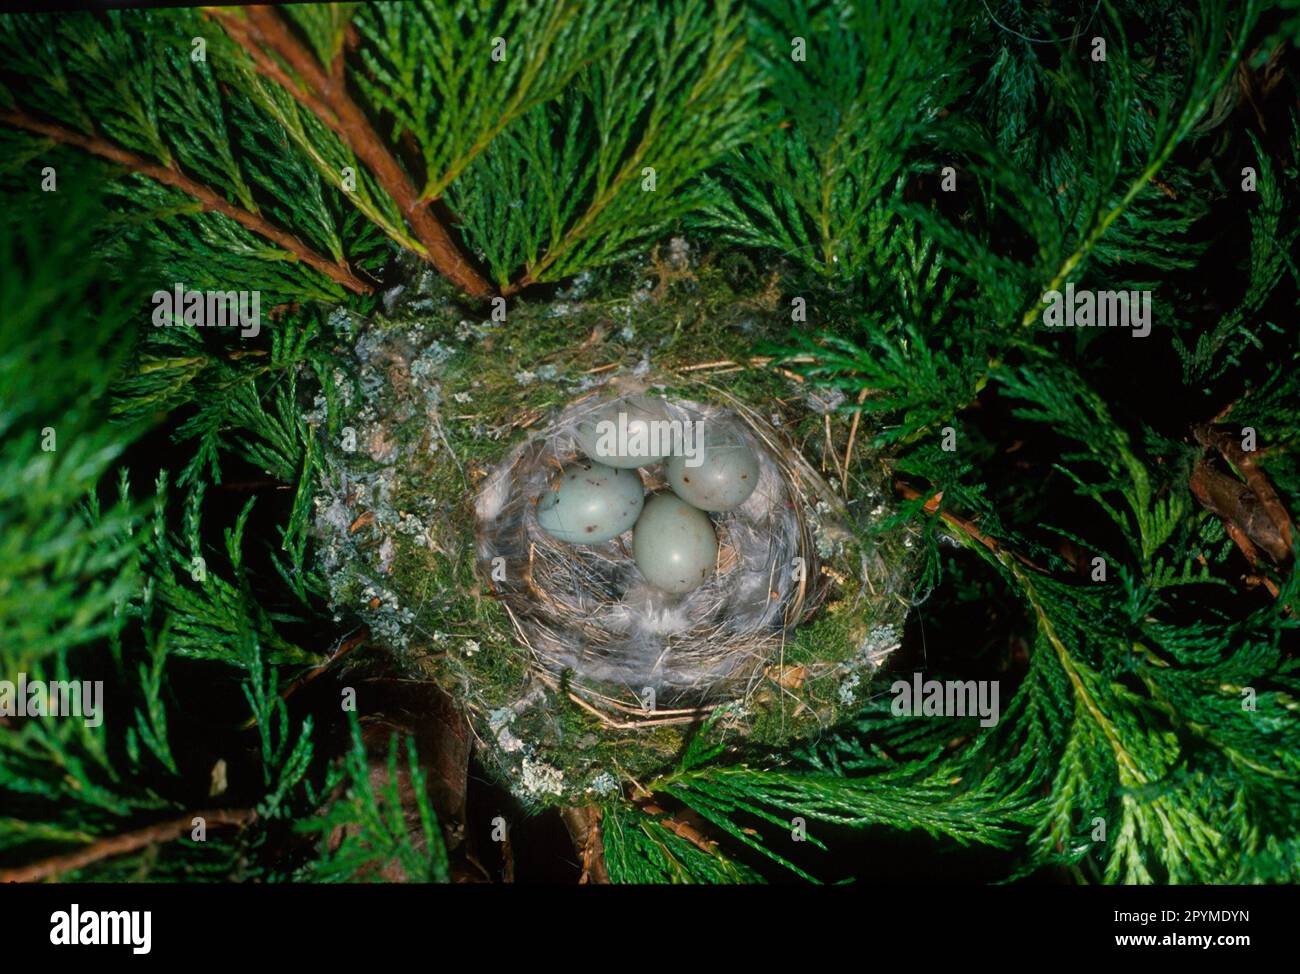 Chaffinch, common chaffinches (Fringilla coelebs), Songbirds, Animals, Birds, Finches, Chaffinch Nest & four eggs Stock Photo